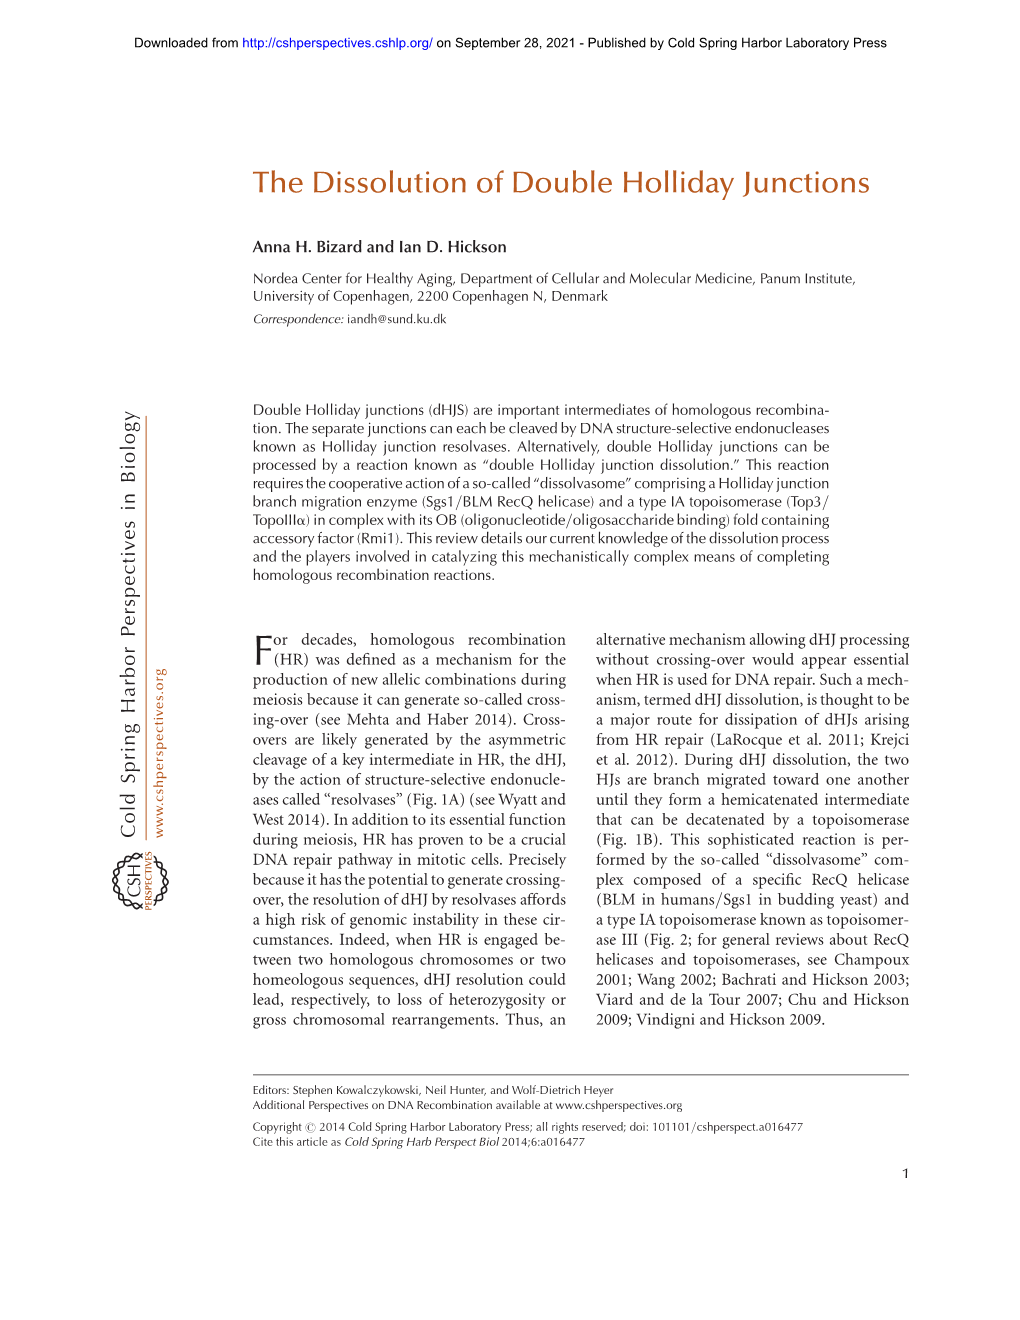 The Dissolution of Double Holliday Junctions